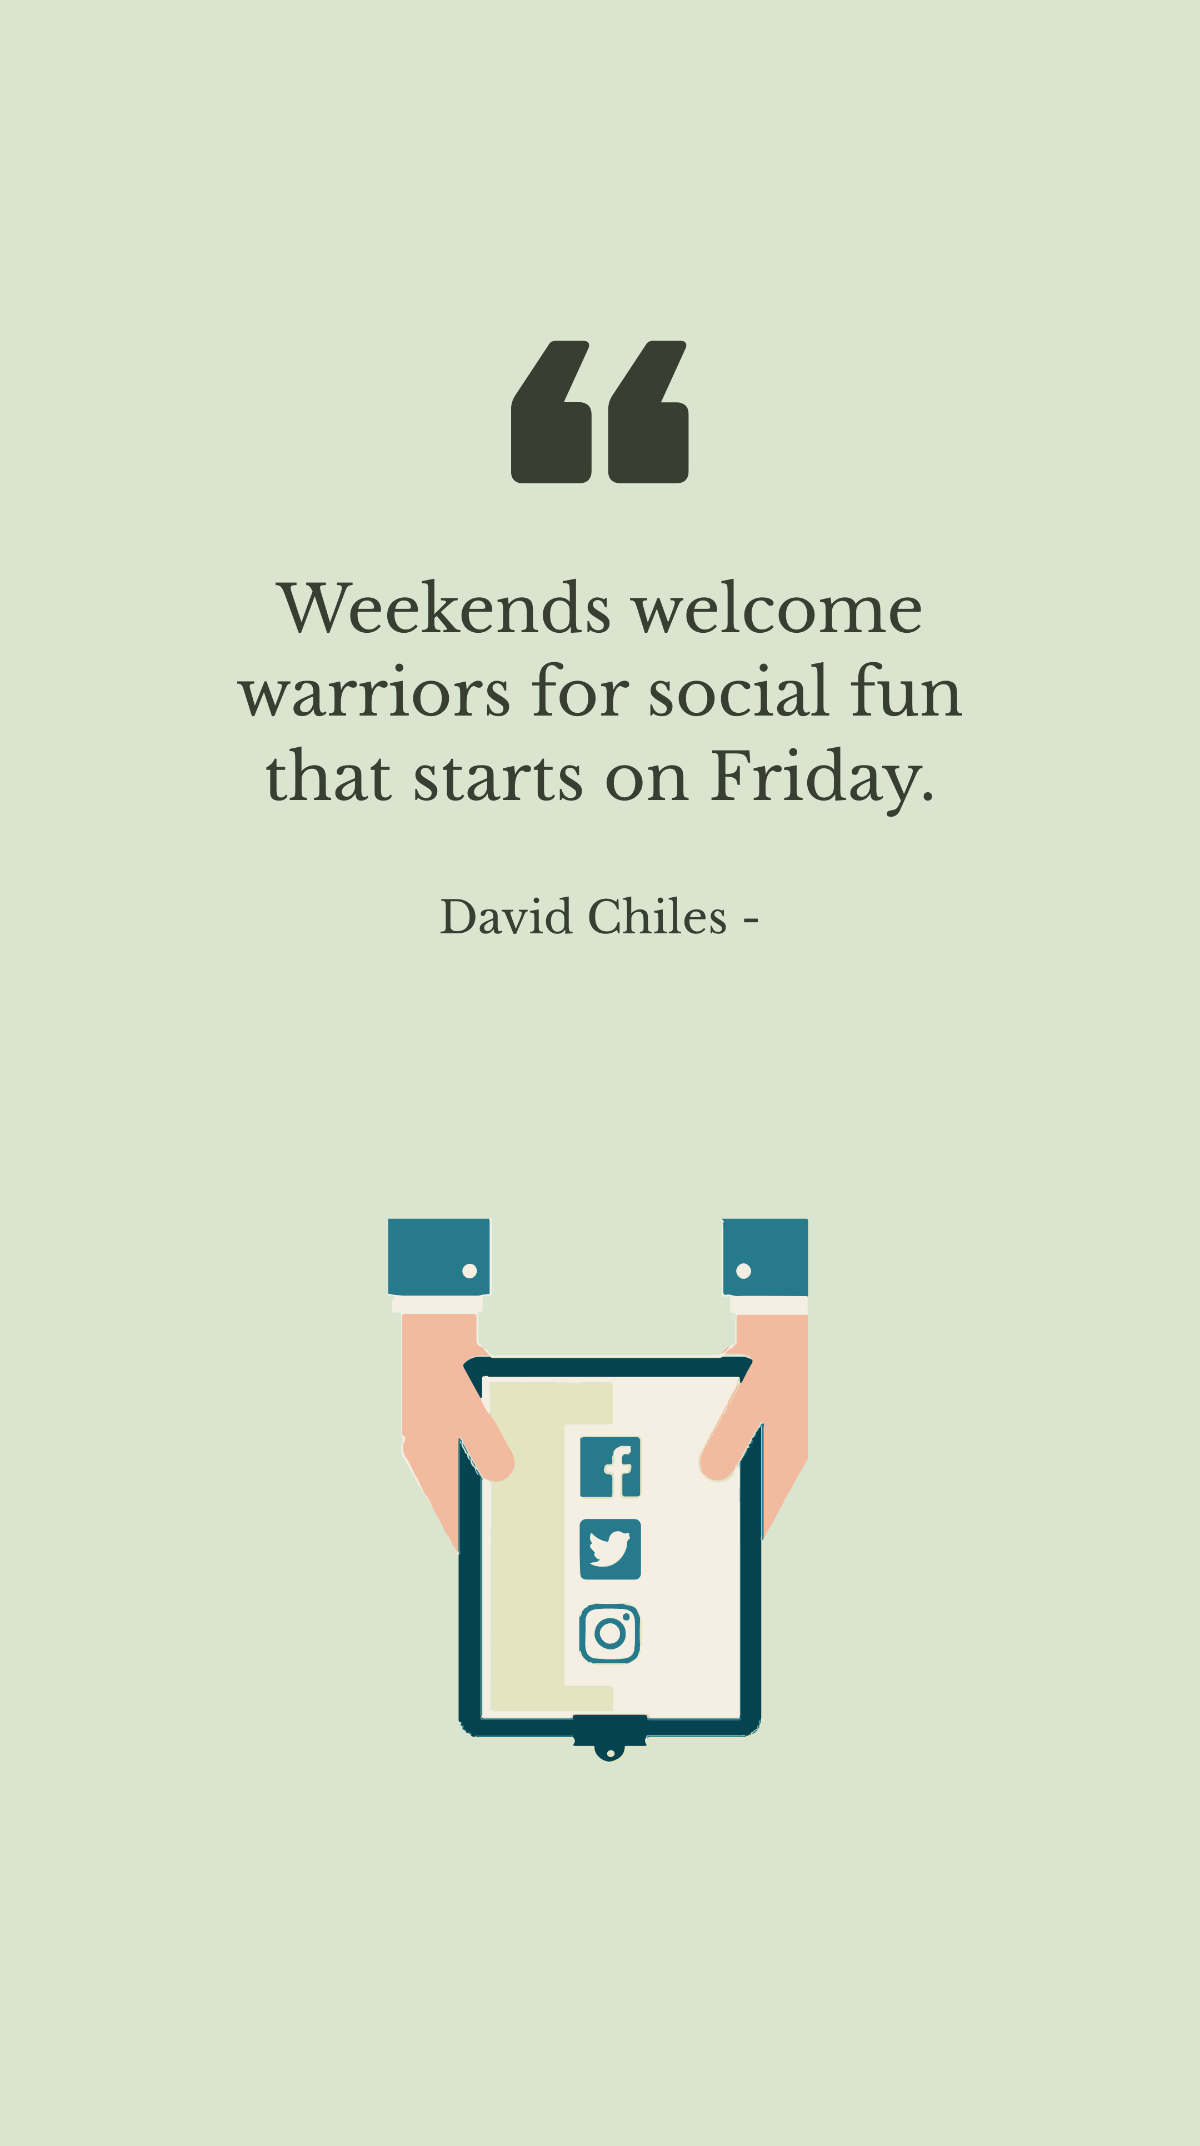 David Chiles - Weekends welcome warriors for social fun that starts on Friday. Template